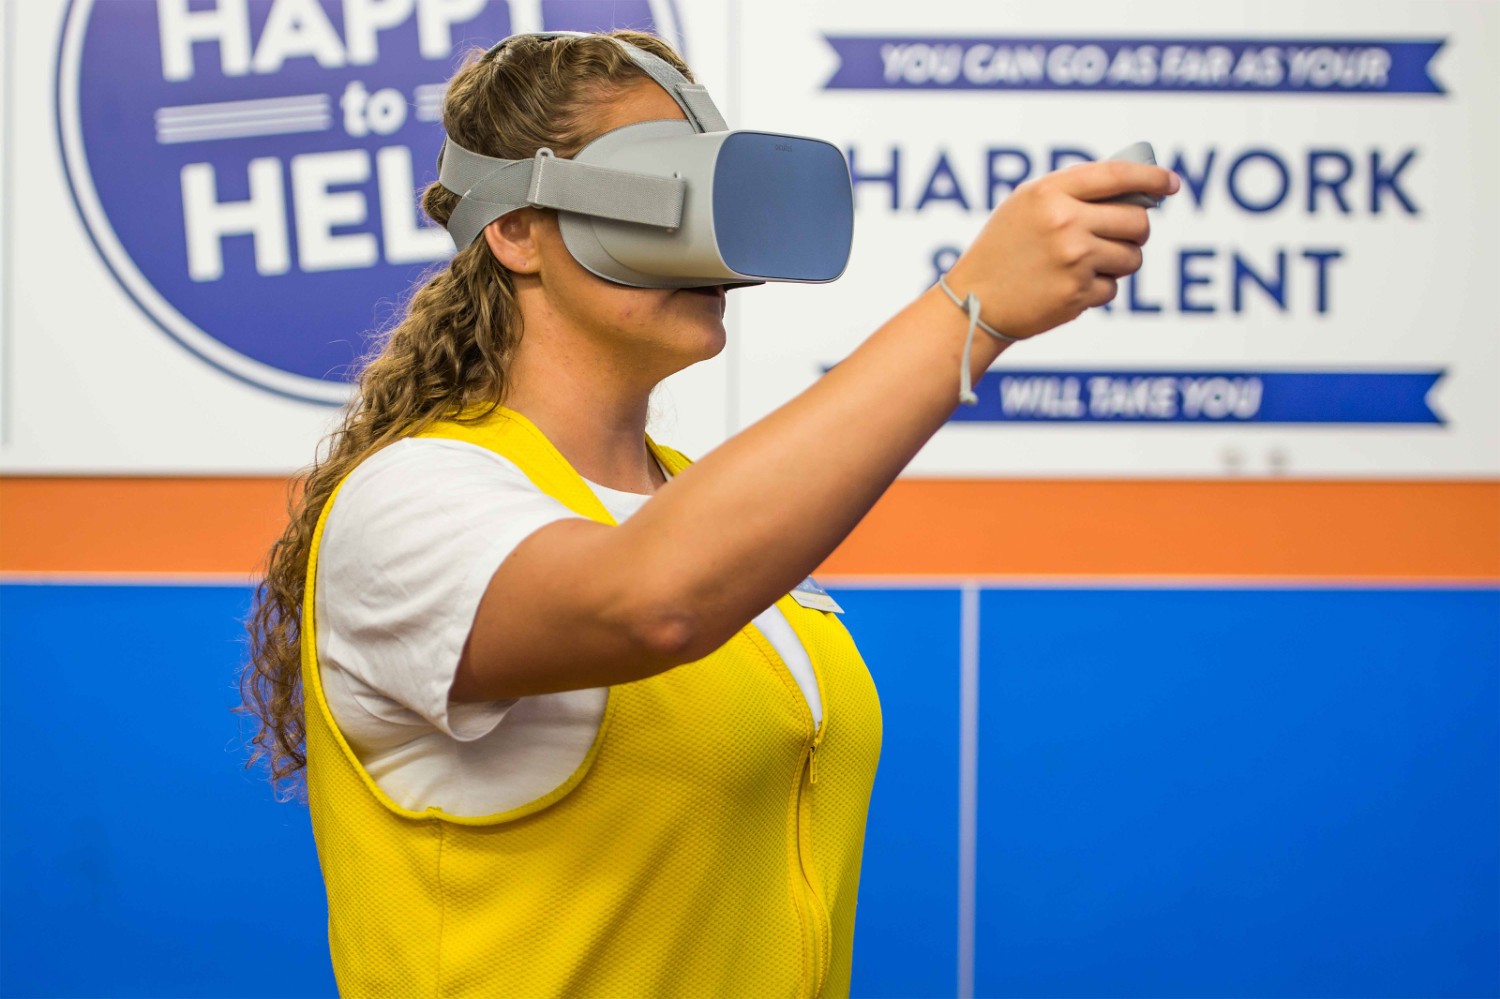 Walmart, the world’s largest retailer, has been using virtual reality training since 2017.